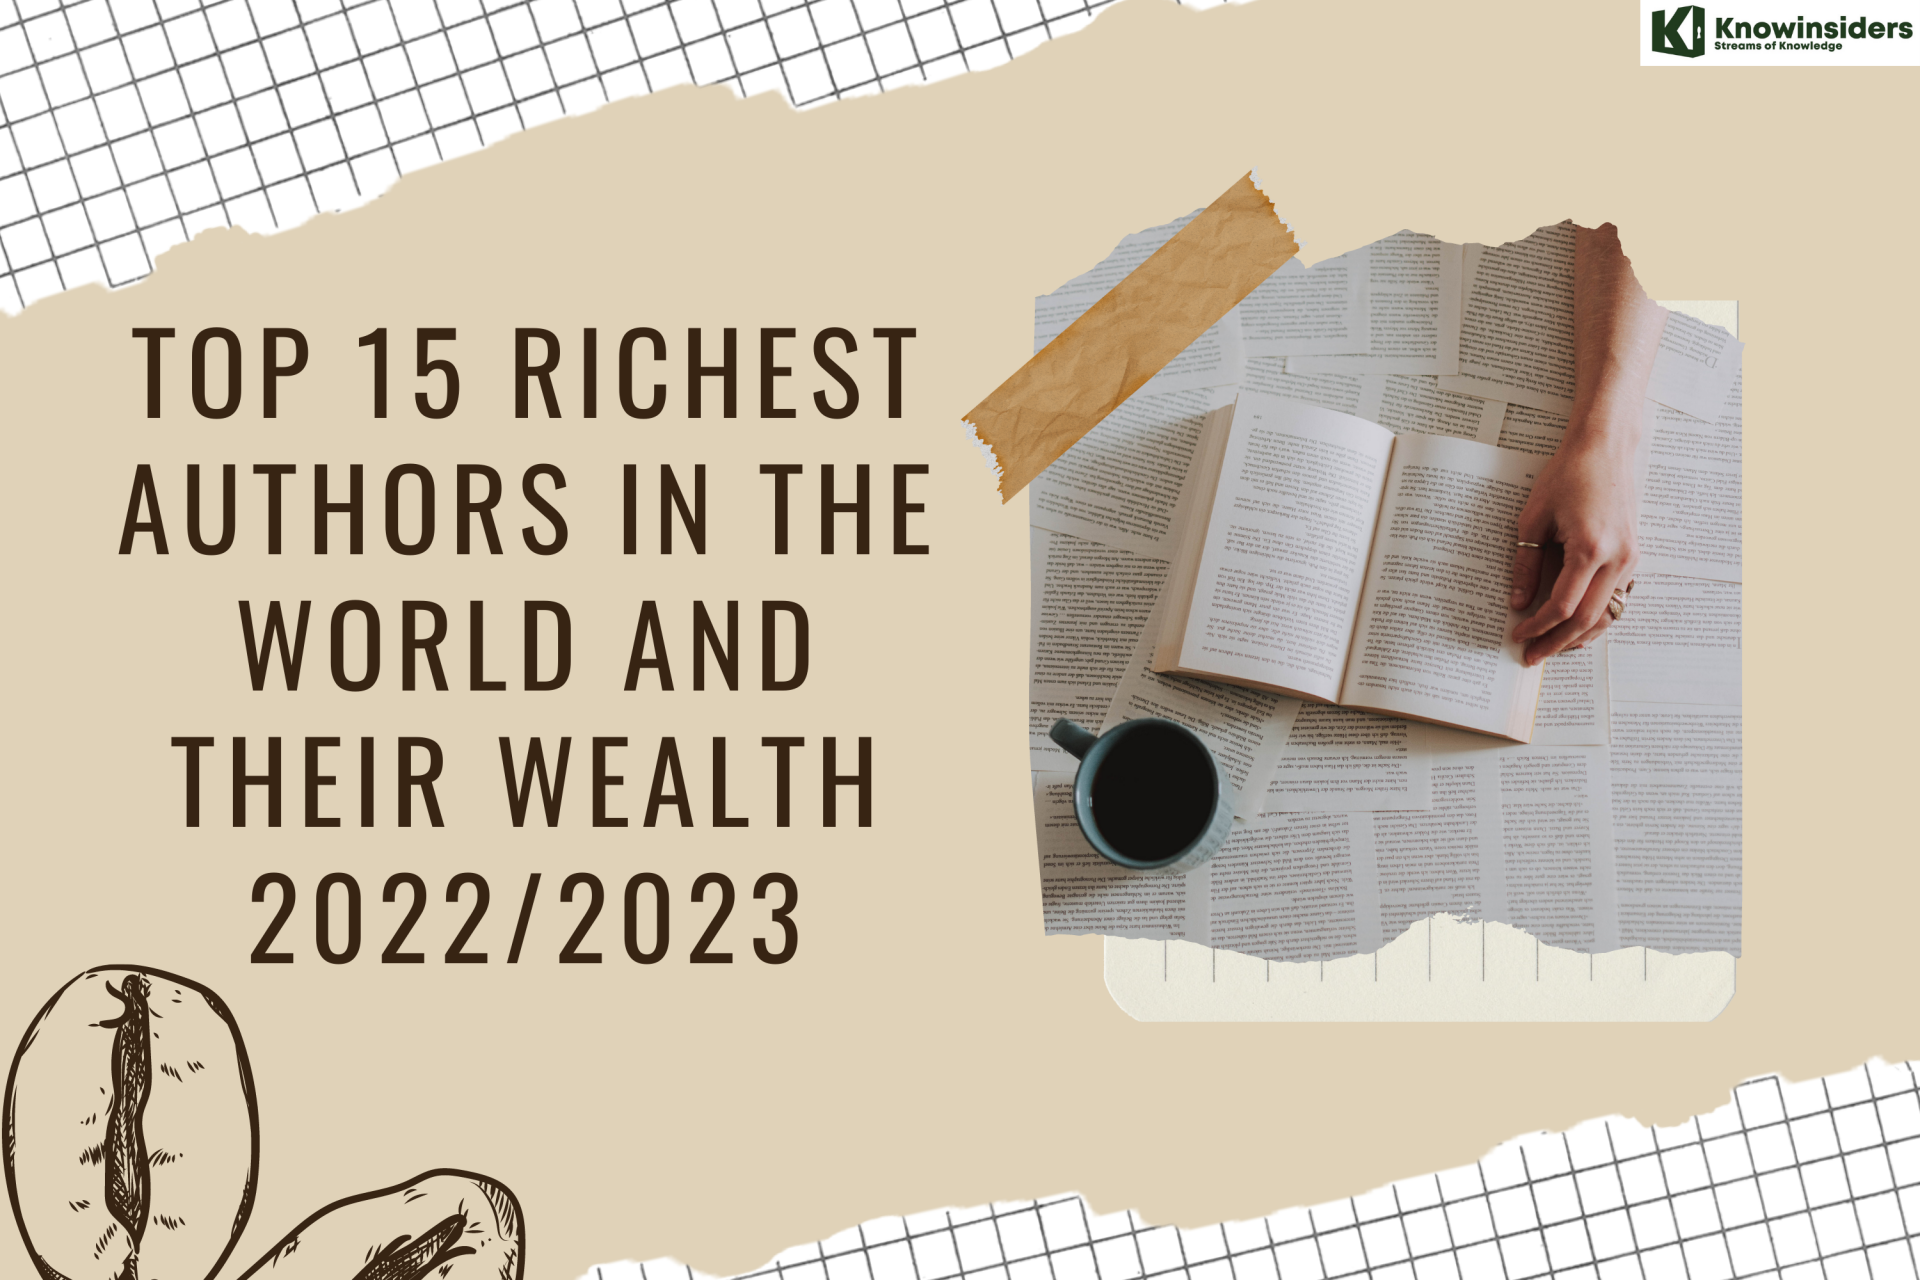 Top 15 Richest Authors In The World and Their Wealth 2022/2023